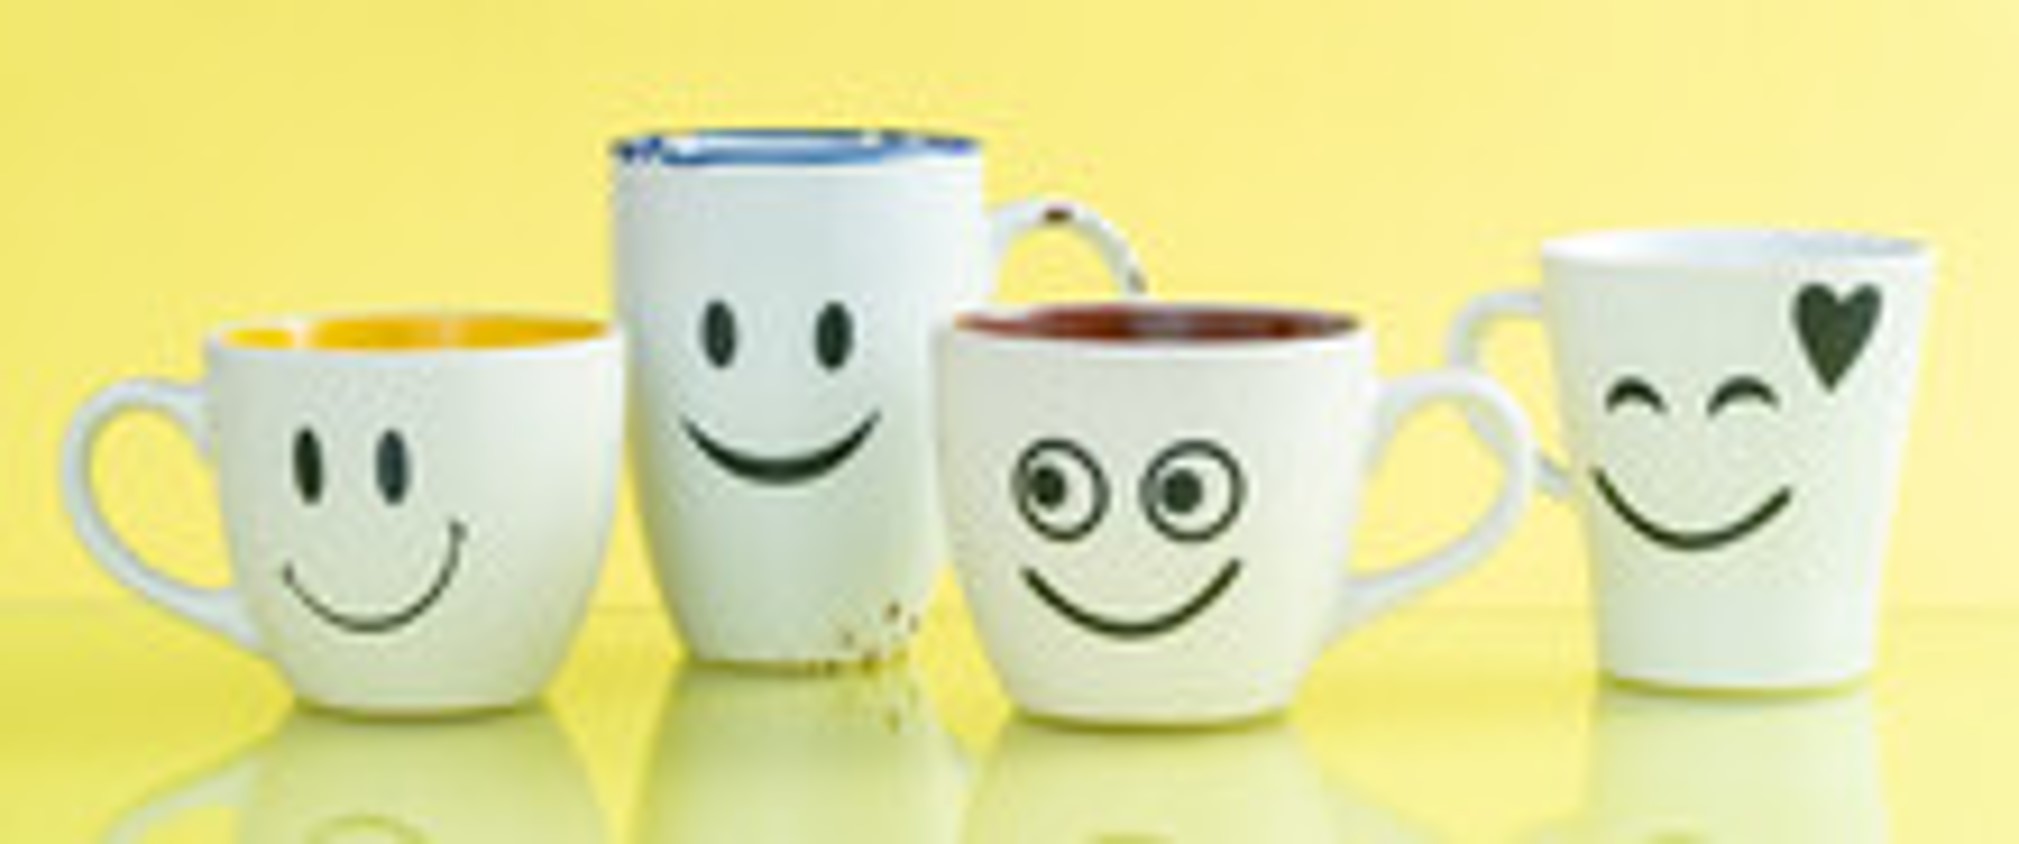 Coffee cups with smiley faces to invite people to come for coffee and meet people